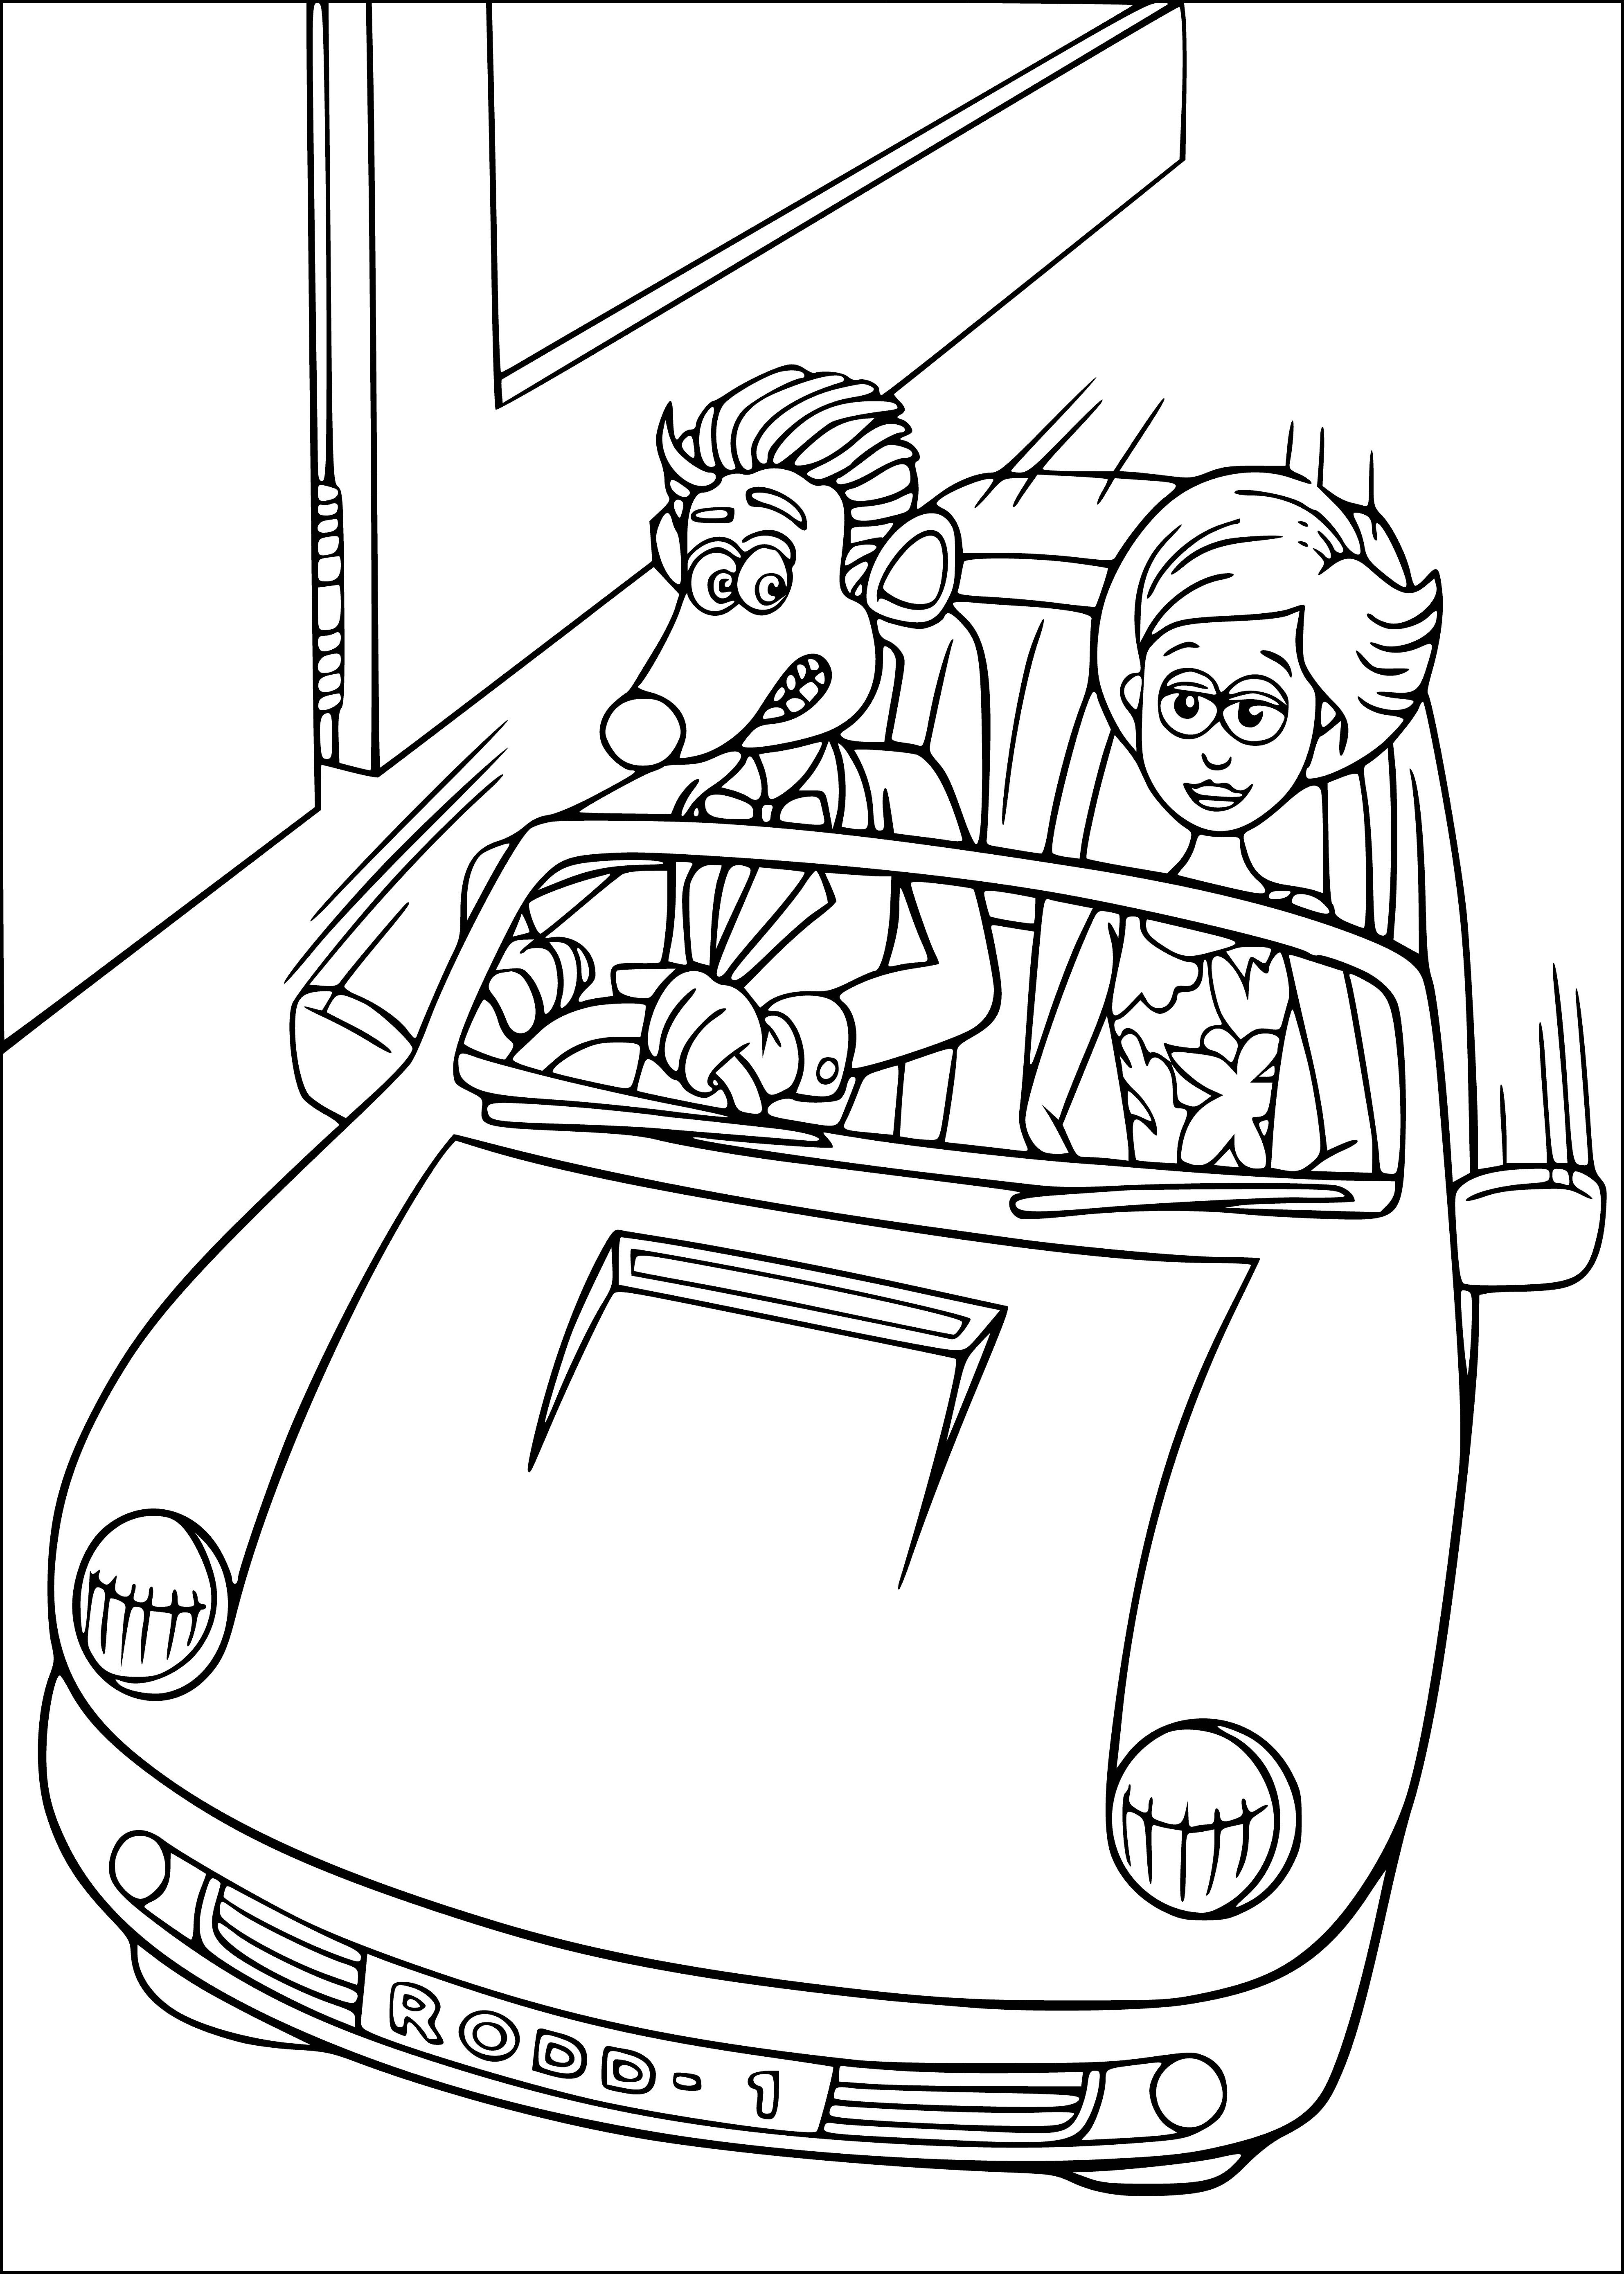 Roddy St. James coloring page